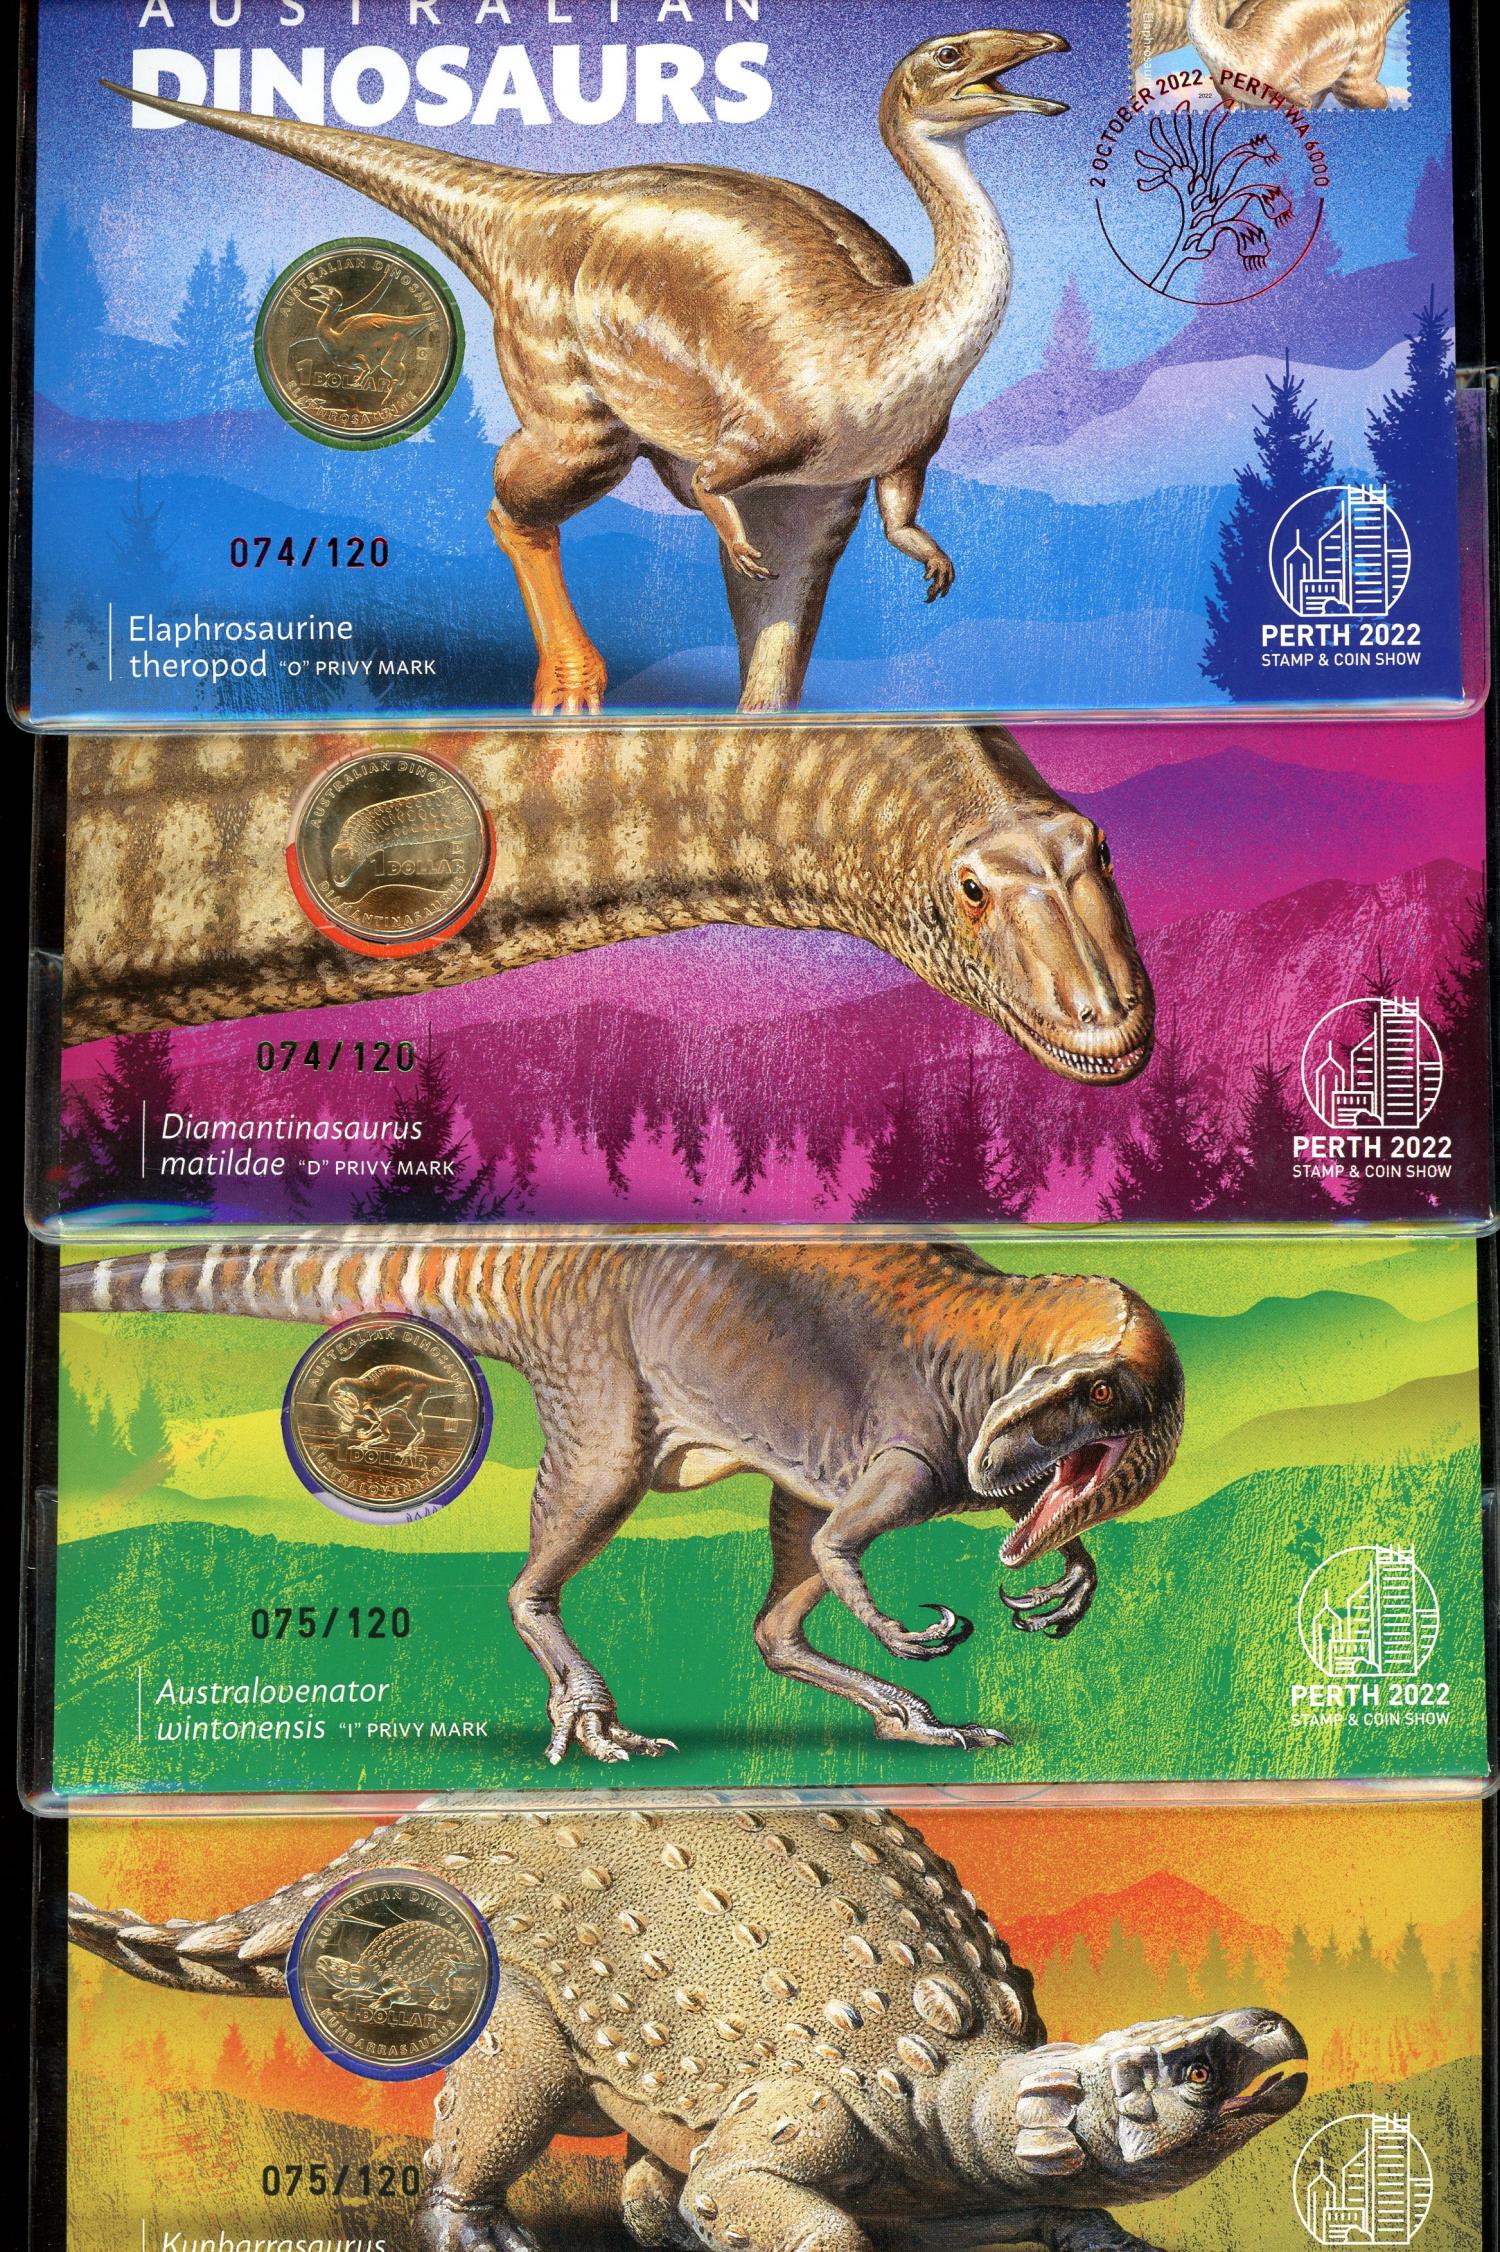 Thumbnail for 2022 Australian Dinosaurs Set of 4 PNCs 074 and 075 - Perth Stamp and Coin Show Limited to only 120